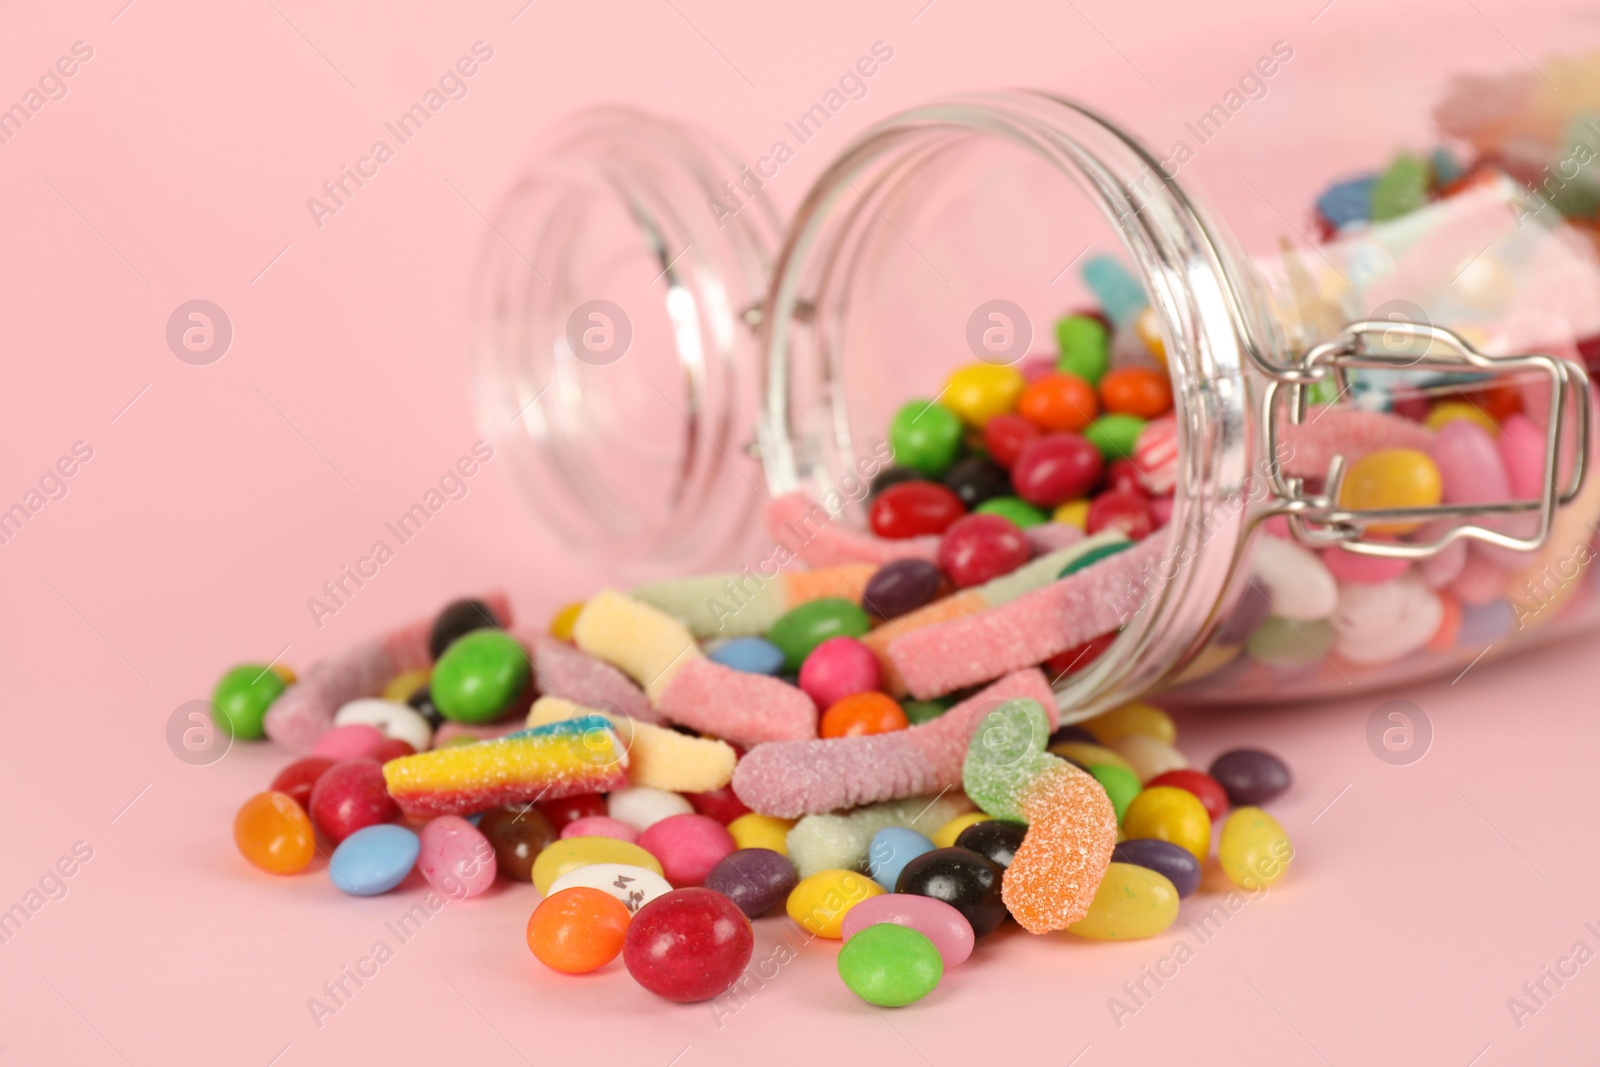 Photo of Overturned glass jar and scattered candies on pink background, closeup